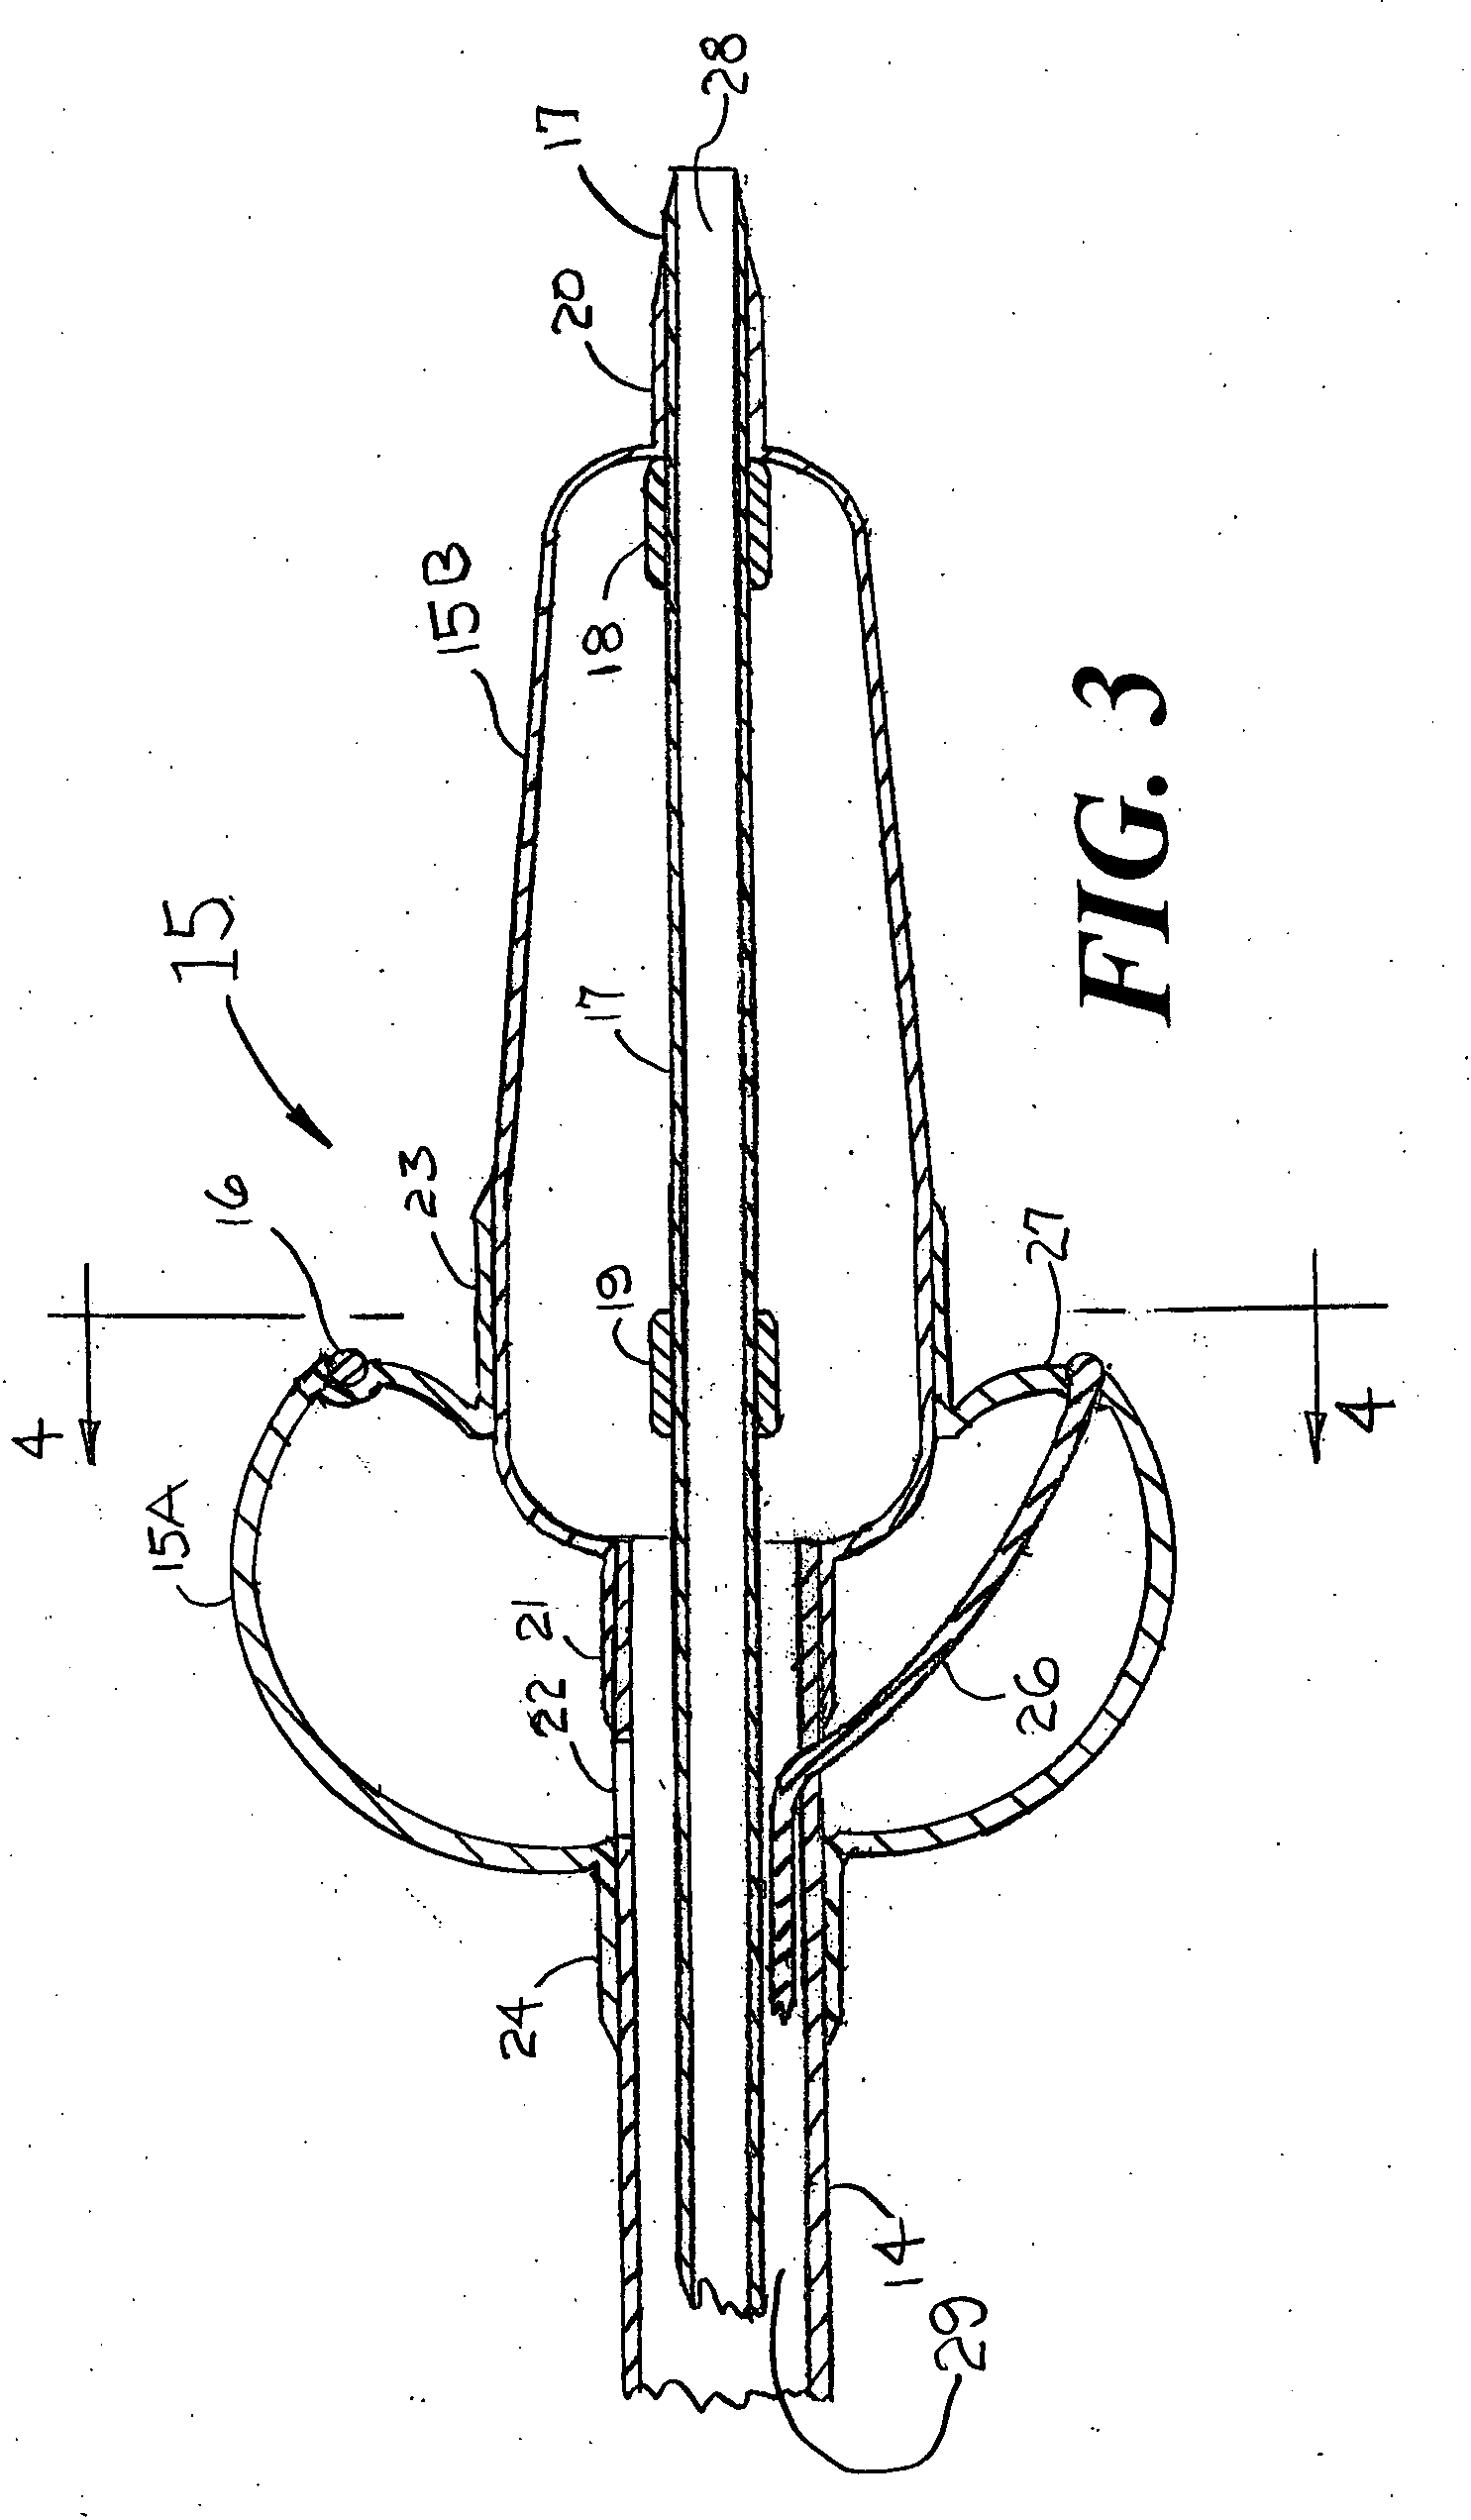 Catheter system for the treatment of atrial fibrillation